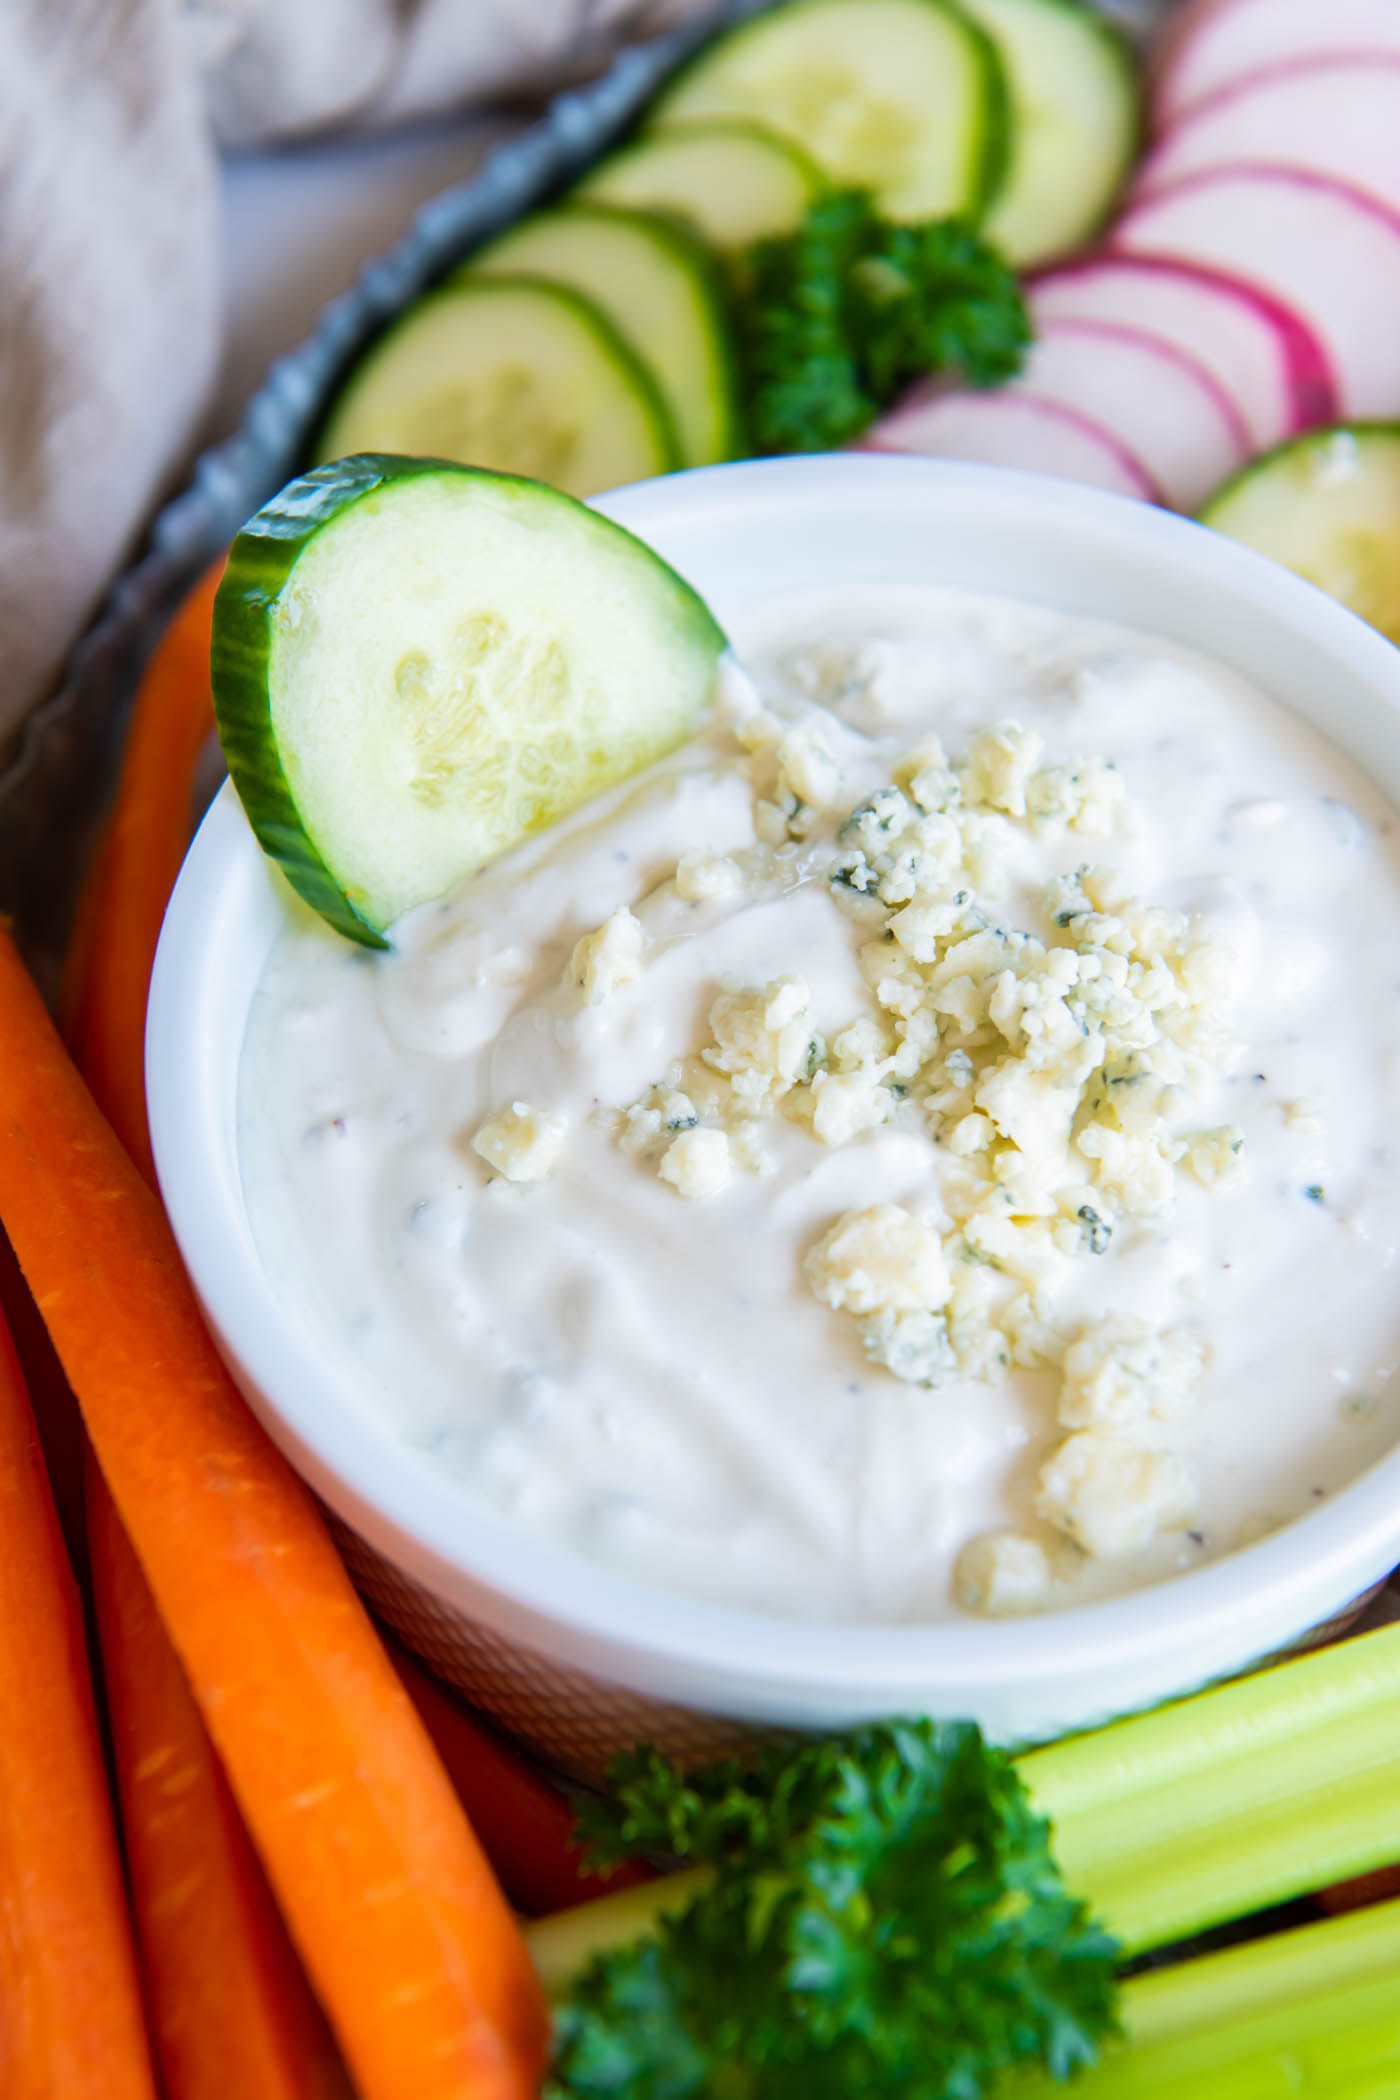 Blue cheese dressing in a small white bowl with a cucumber slice.